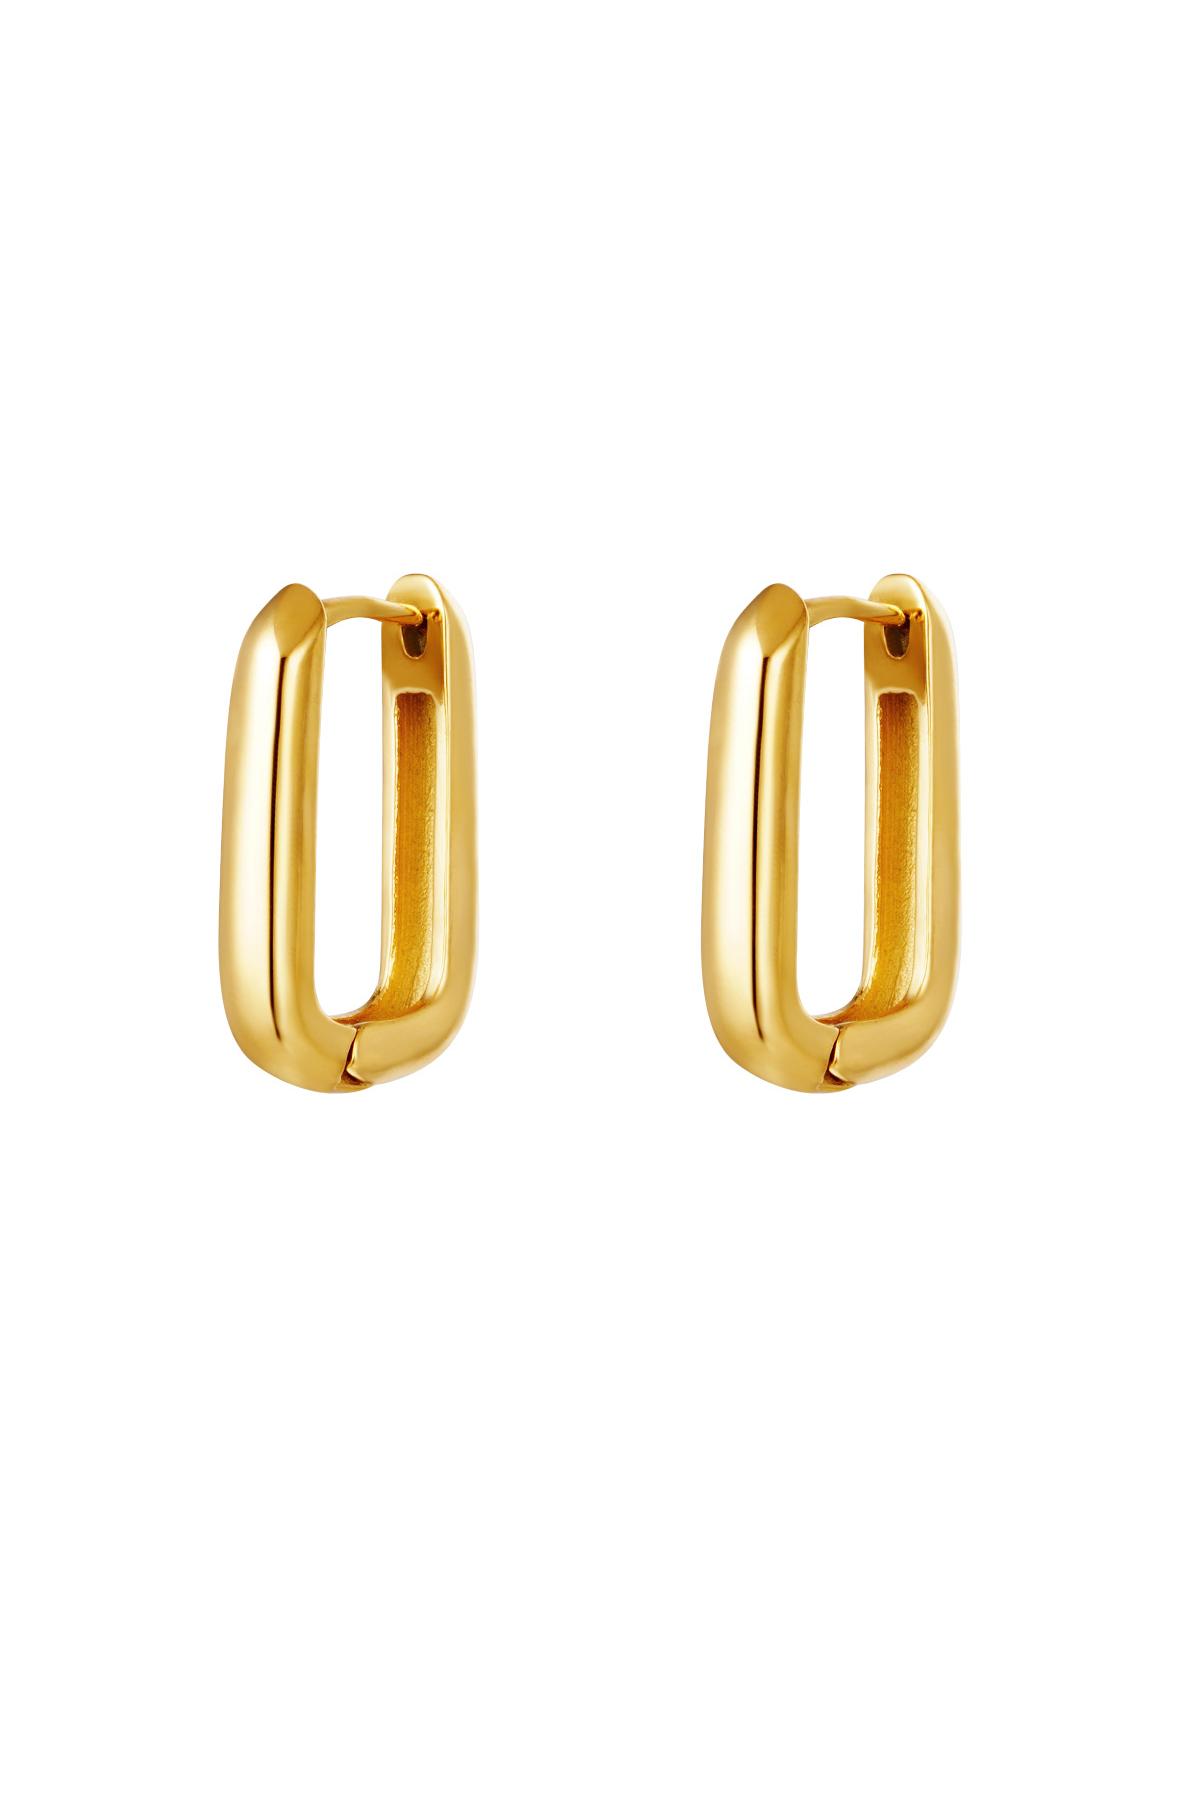 Earrings square large Gold Stainless Steel h5 